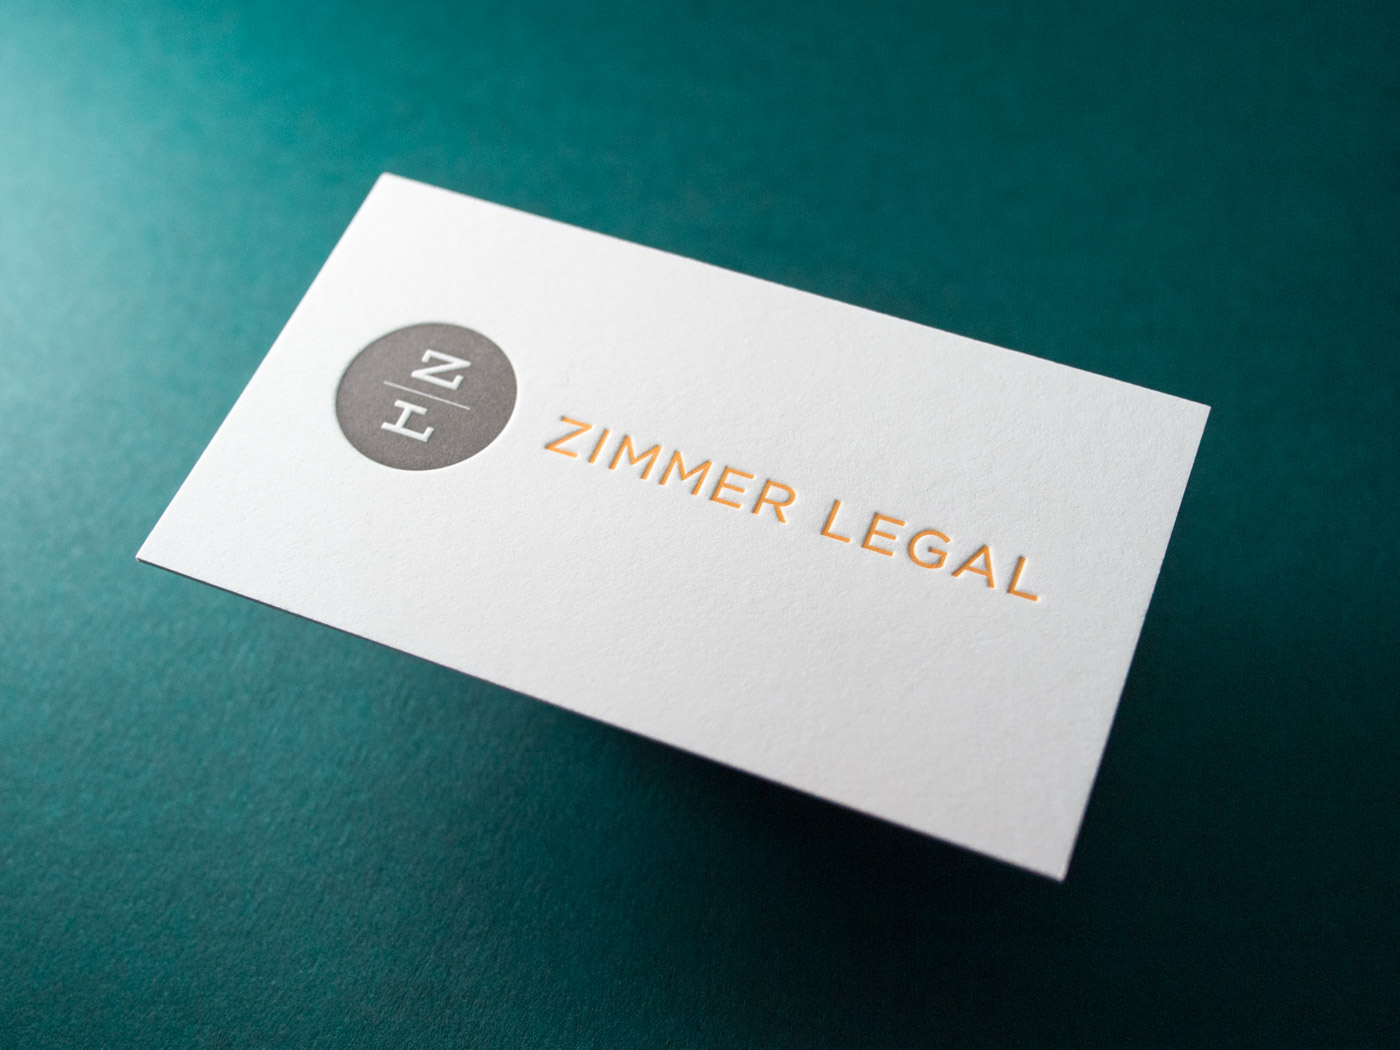 Zimmer Legal | Printed by Parklife Press